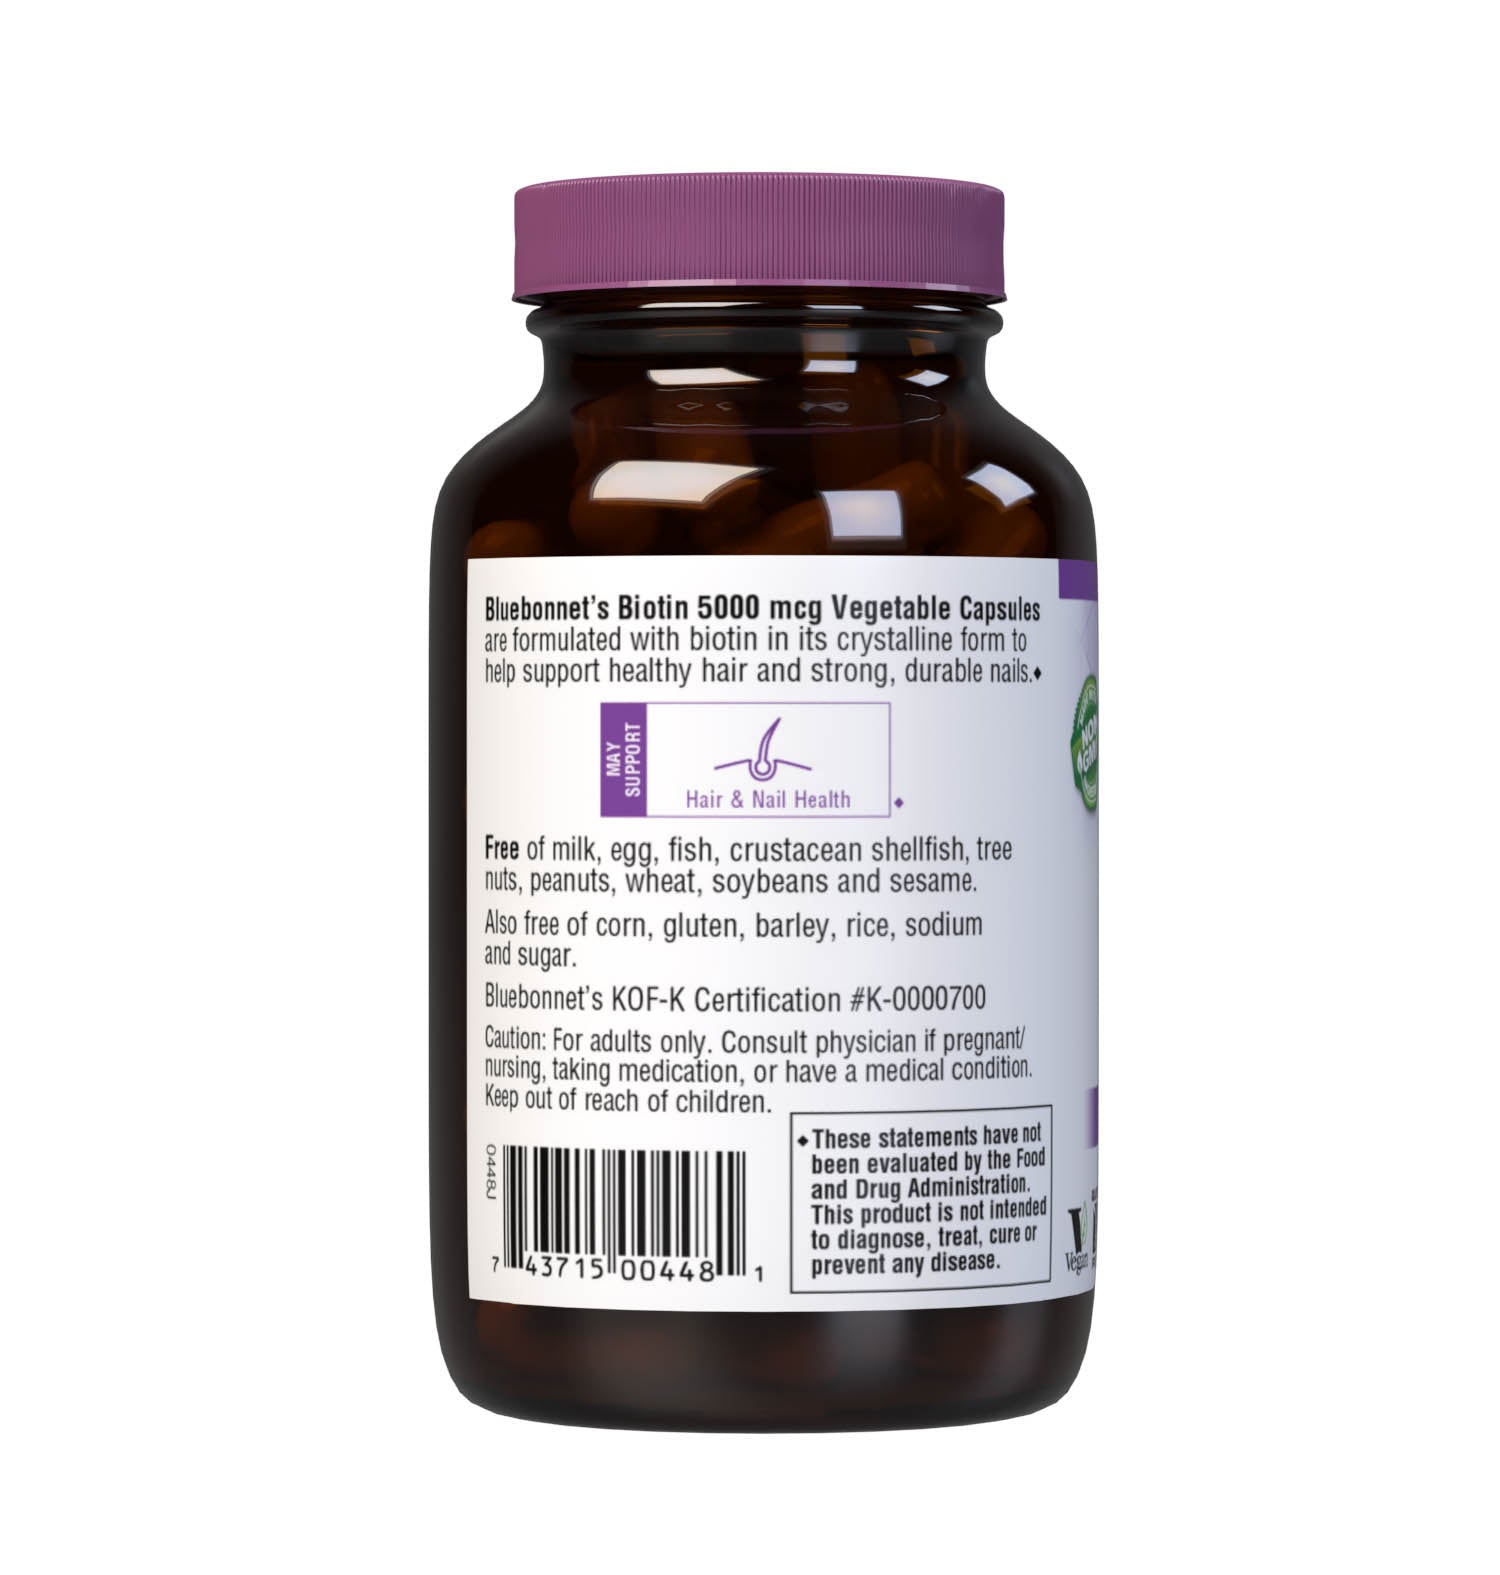 Bluebonnet’s Biotin 5000 mcg Capsules are formulated with yeast-free biotin in its crystalline form to support healthy hair and strong, durable nails. Description panel. #size_120 count